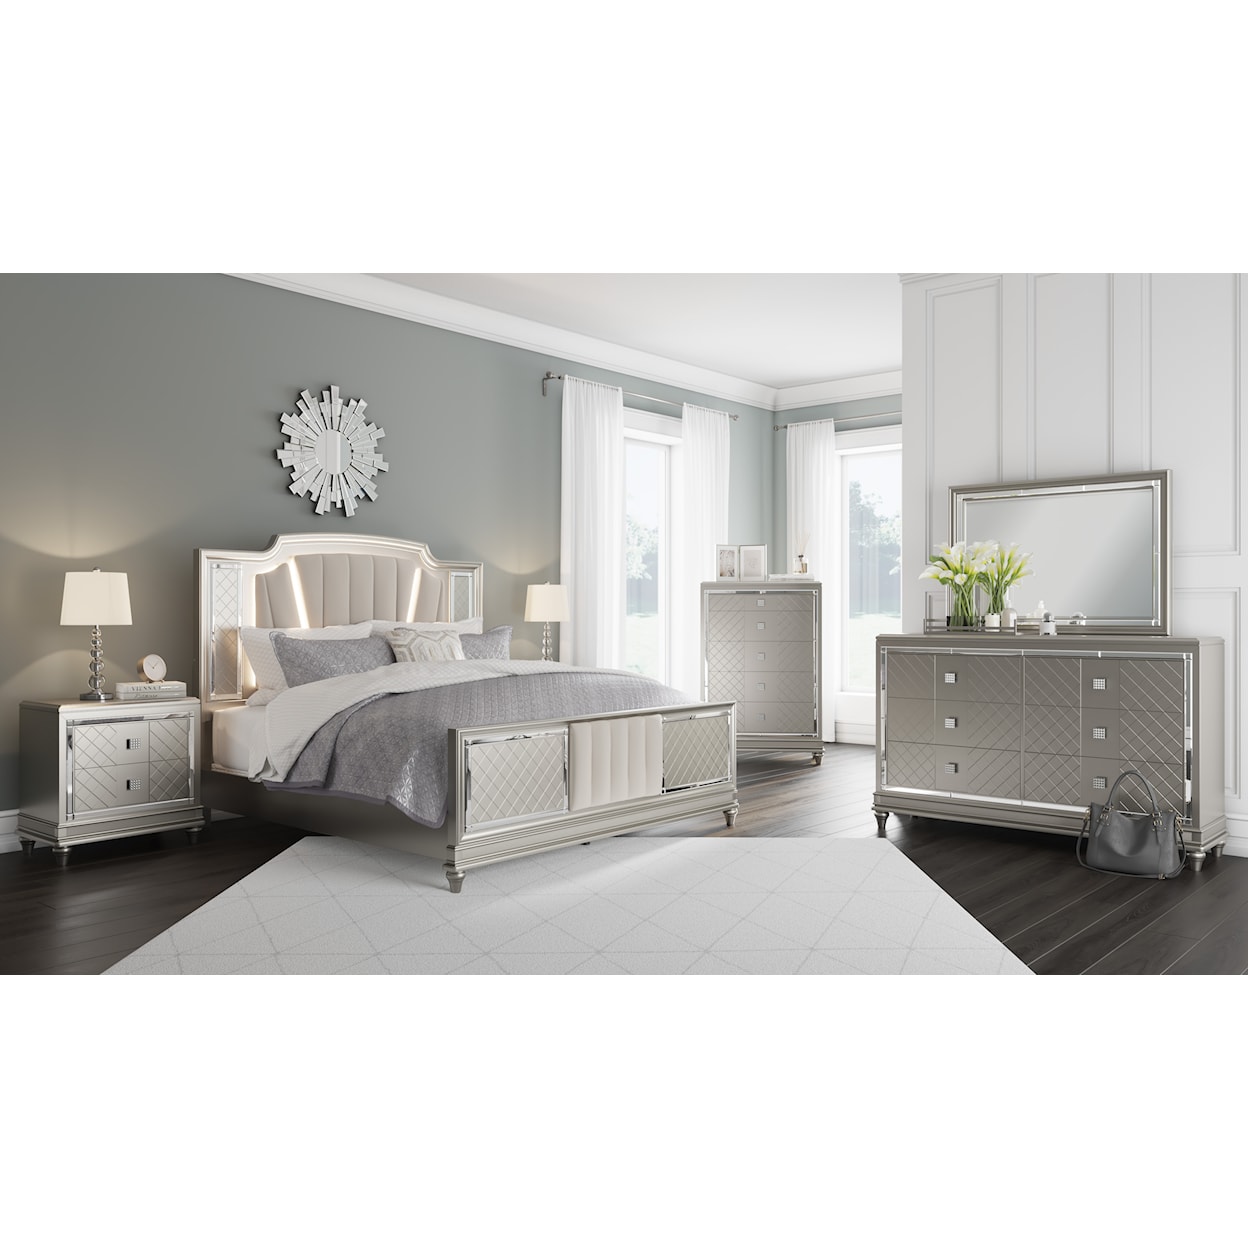 Signature Design by Ashley Chevanna King Bedroom Set